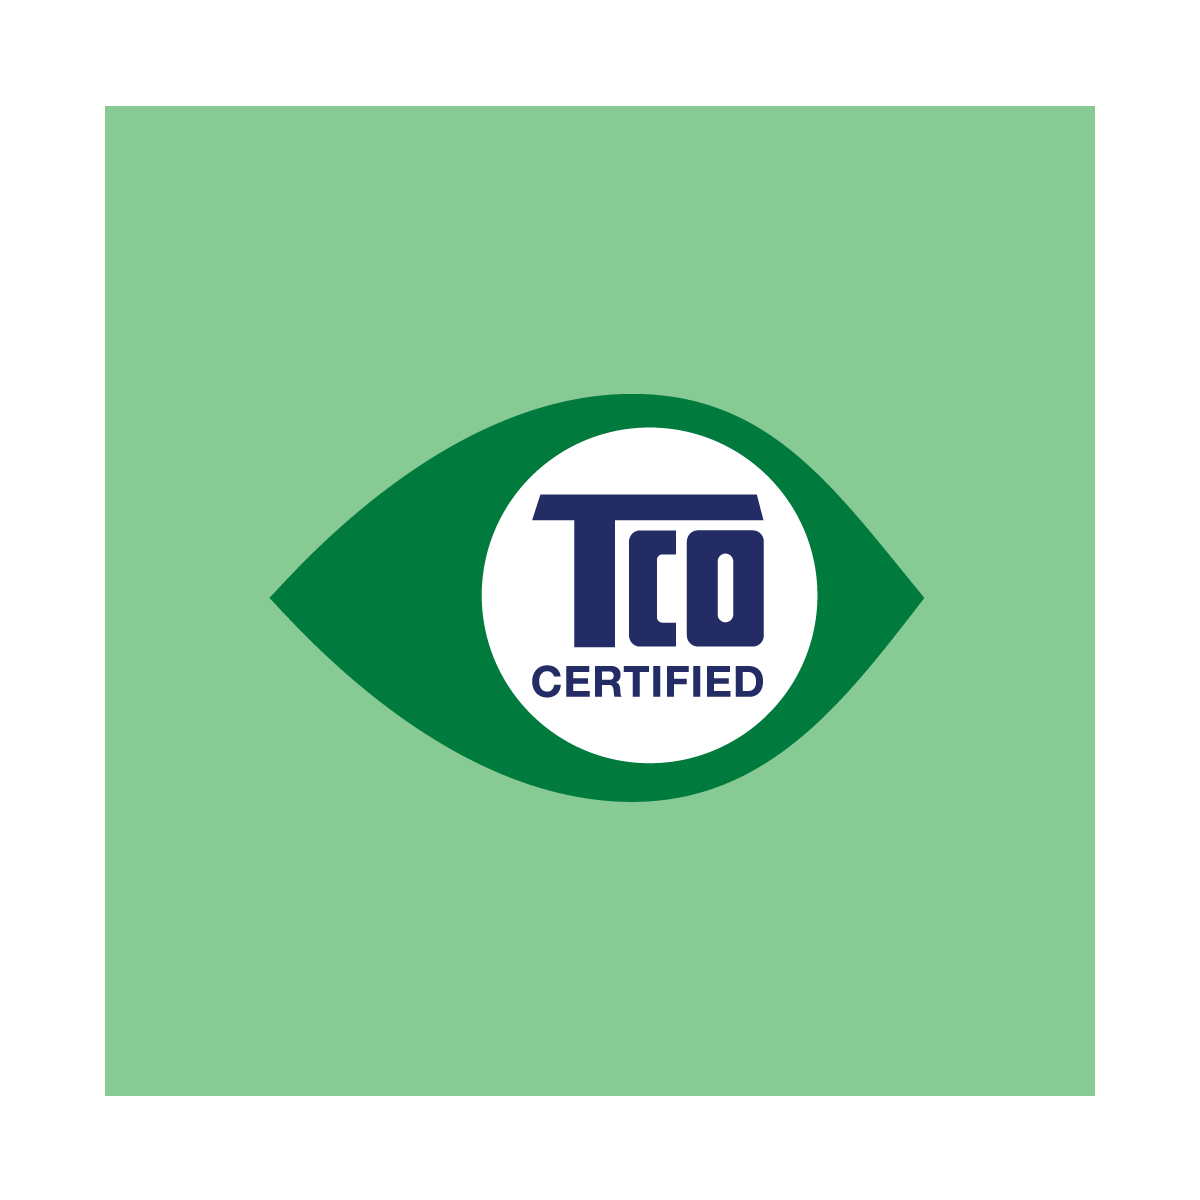 Pourquoi TCO Certified?